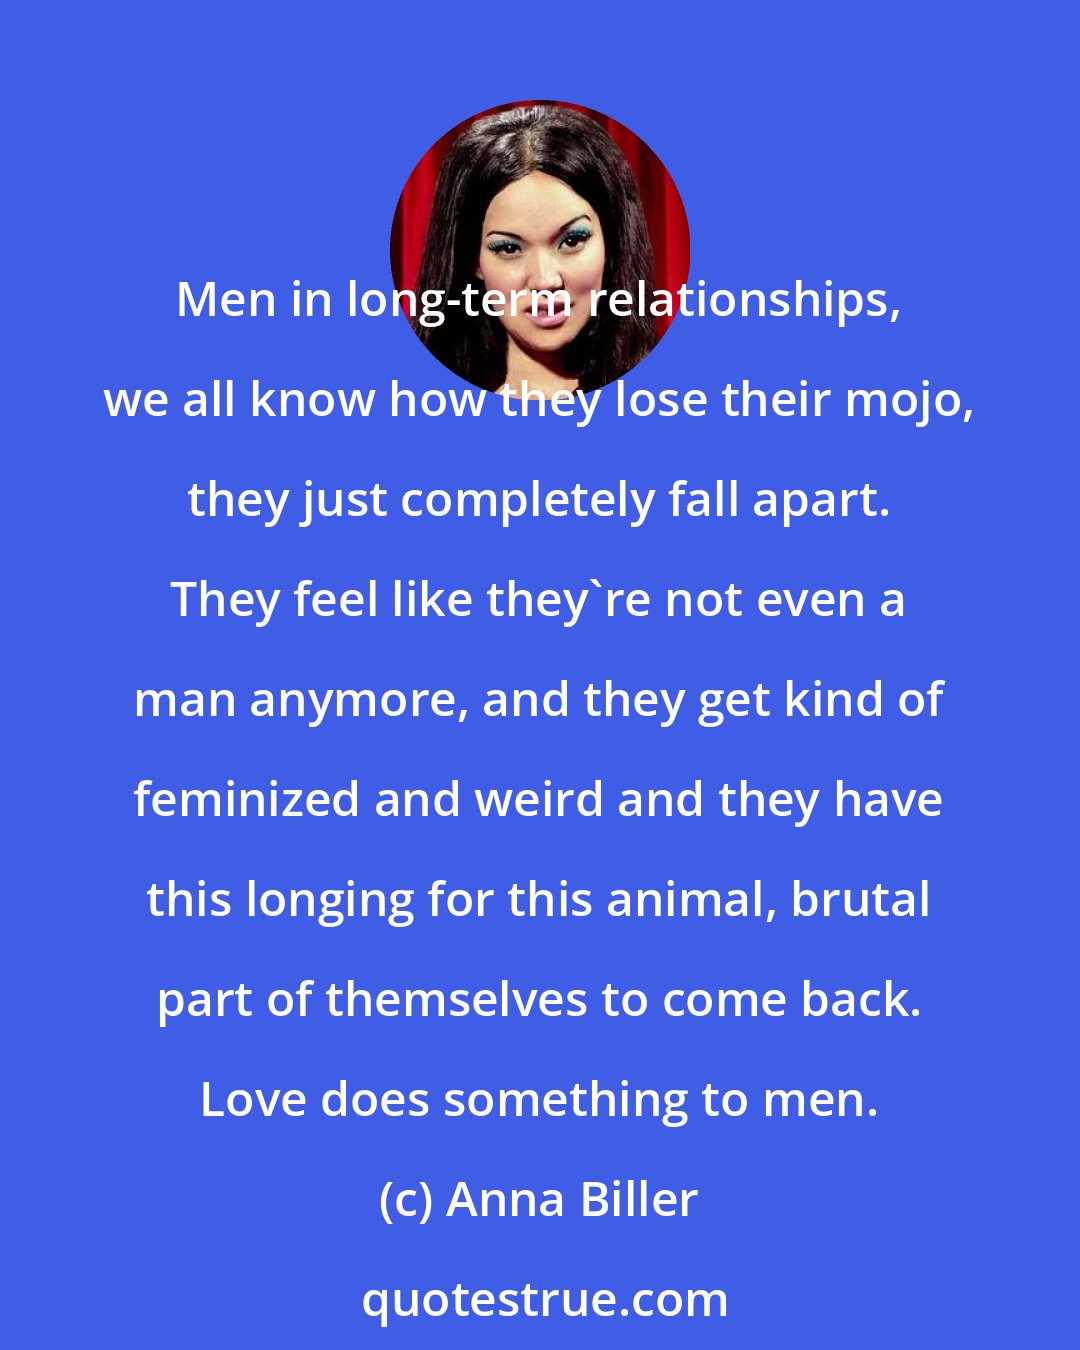 Anna Biller: Men in long-term relationships, we all know how they lose their mojo, they just completely fall apart. They feel like they're not even a man anymore, and they get kind of feminized and weird and they have this longing for this animal, brutal part of themselves to come back. Love does something to men.